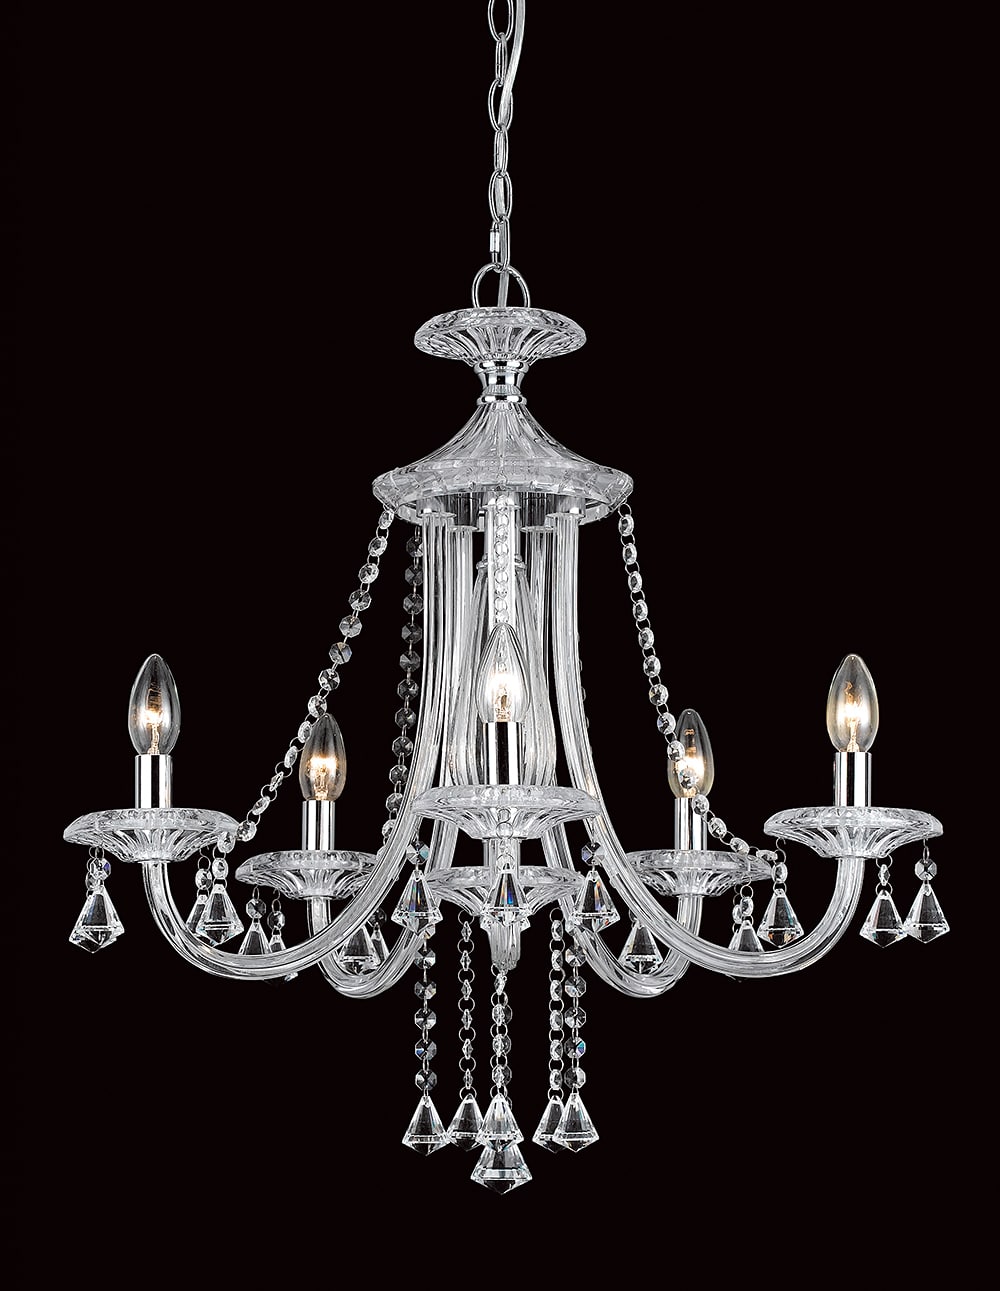 Impex Calgary Classic 5 Arm Chandelier Polished Chrome & Crystal